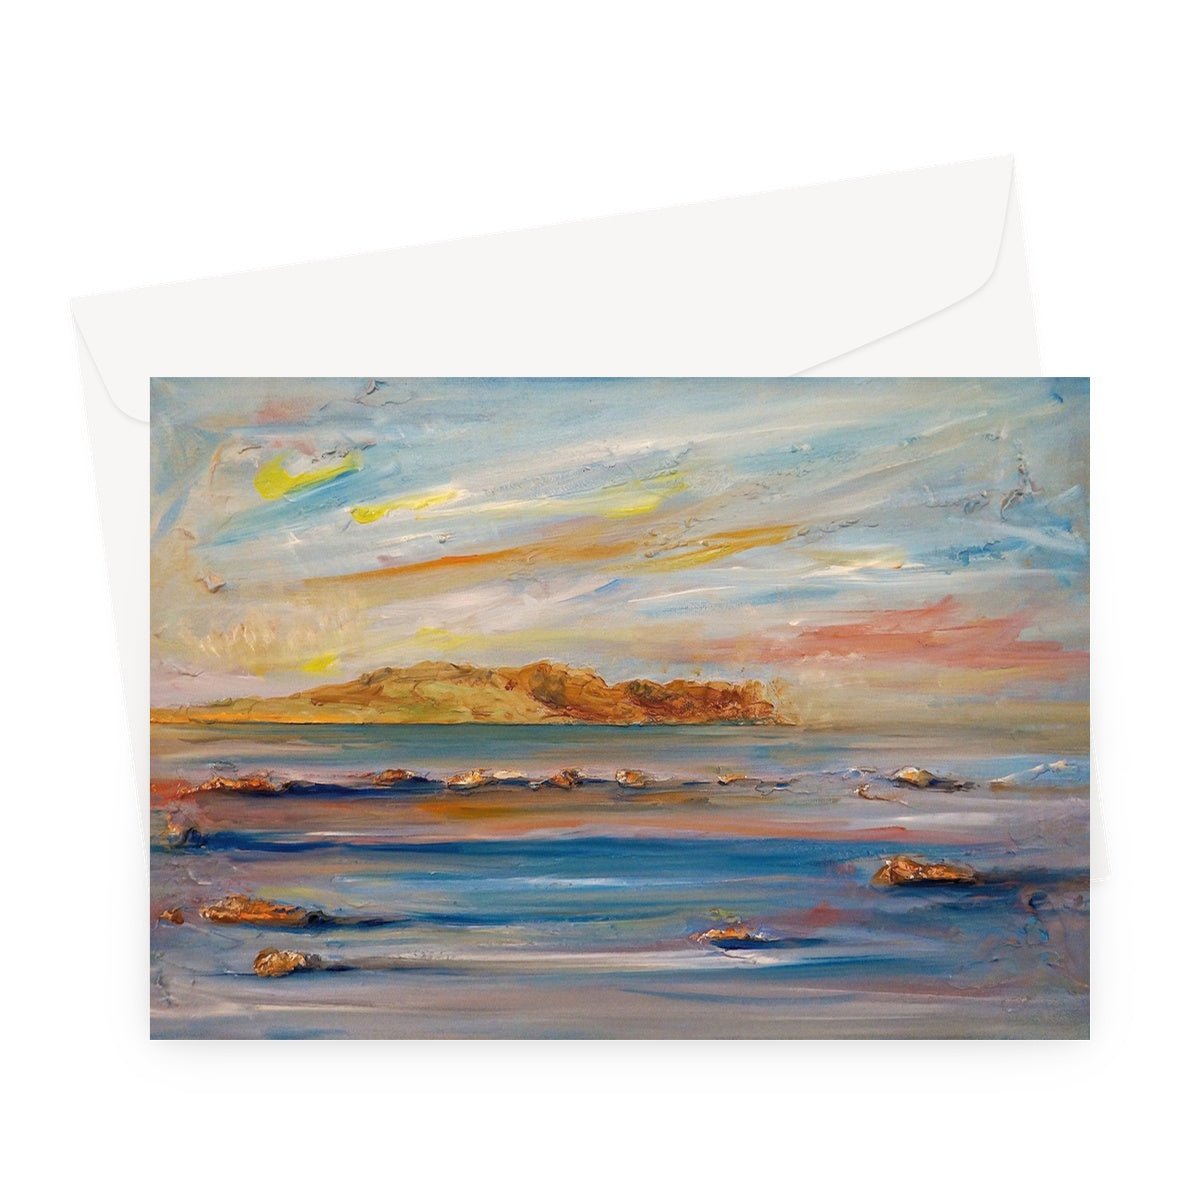 Tiree Dawn Art Gifts Greeting Card-Greetings Cards-Hebridean Islands Art Gallery-A5 Landscape-1 Card-Paintings, Prints, Homeware, Art Gifts From Scotland By Scottish Artist Kevin Hunter